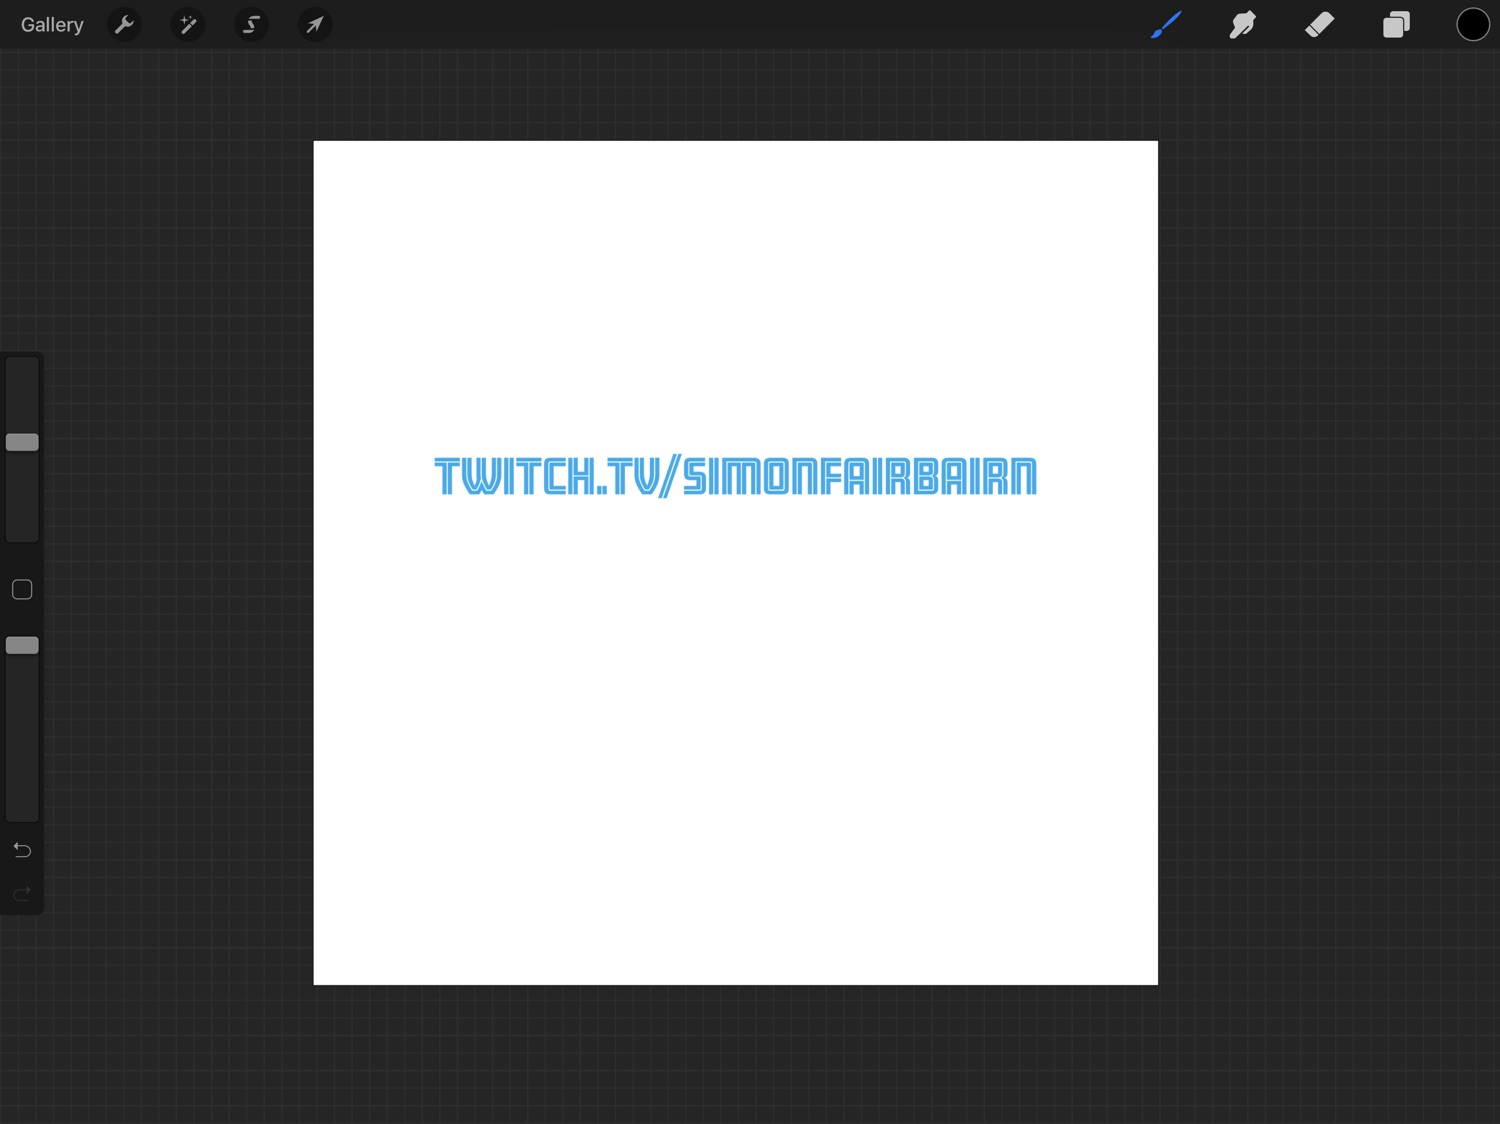 The Procreate app with the layer mask applied, which has caused the blue background to turn in to blue text on a white background. The blue text says twitch.tv/simonfairbairn.